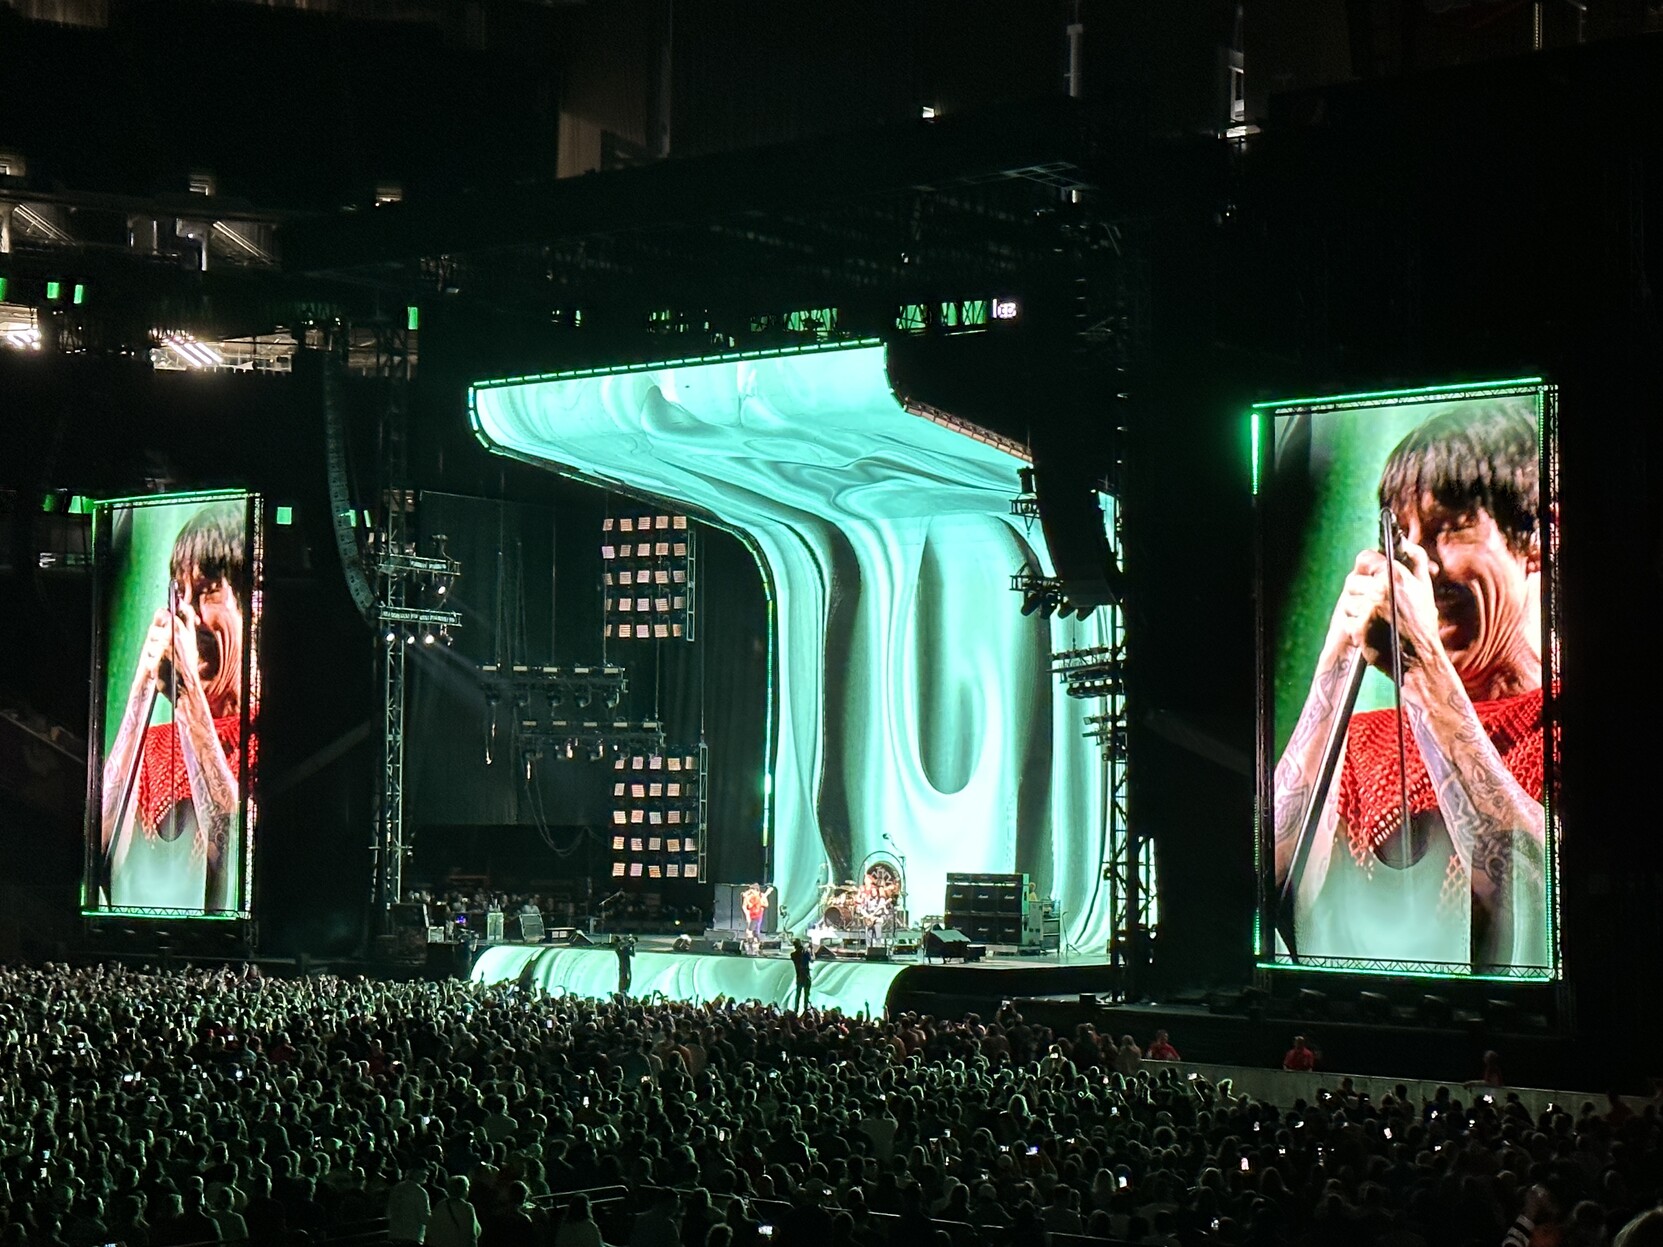 Crowd shot of the stage with two large video boards on each side that are displaying close-up video of the lead singer Anthony Kiedis